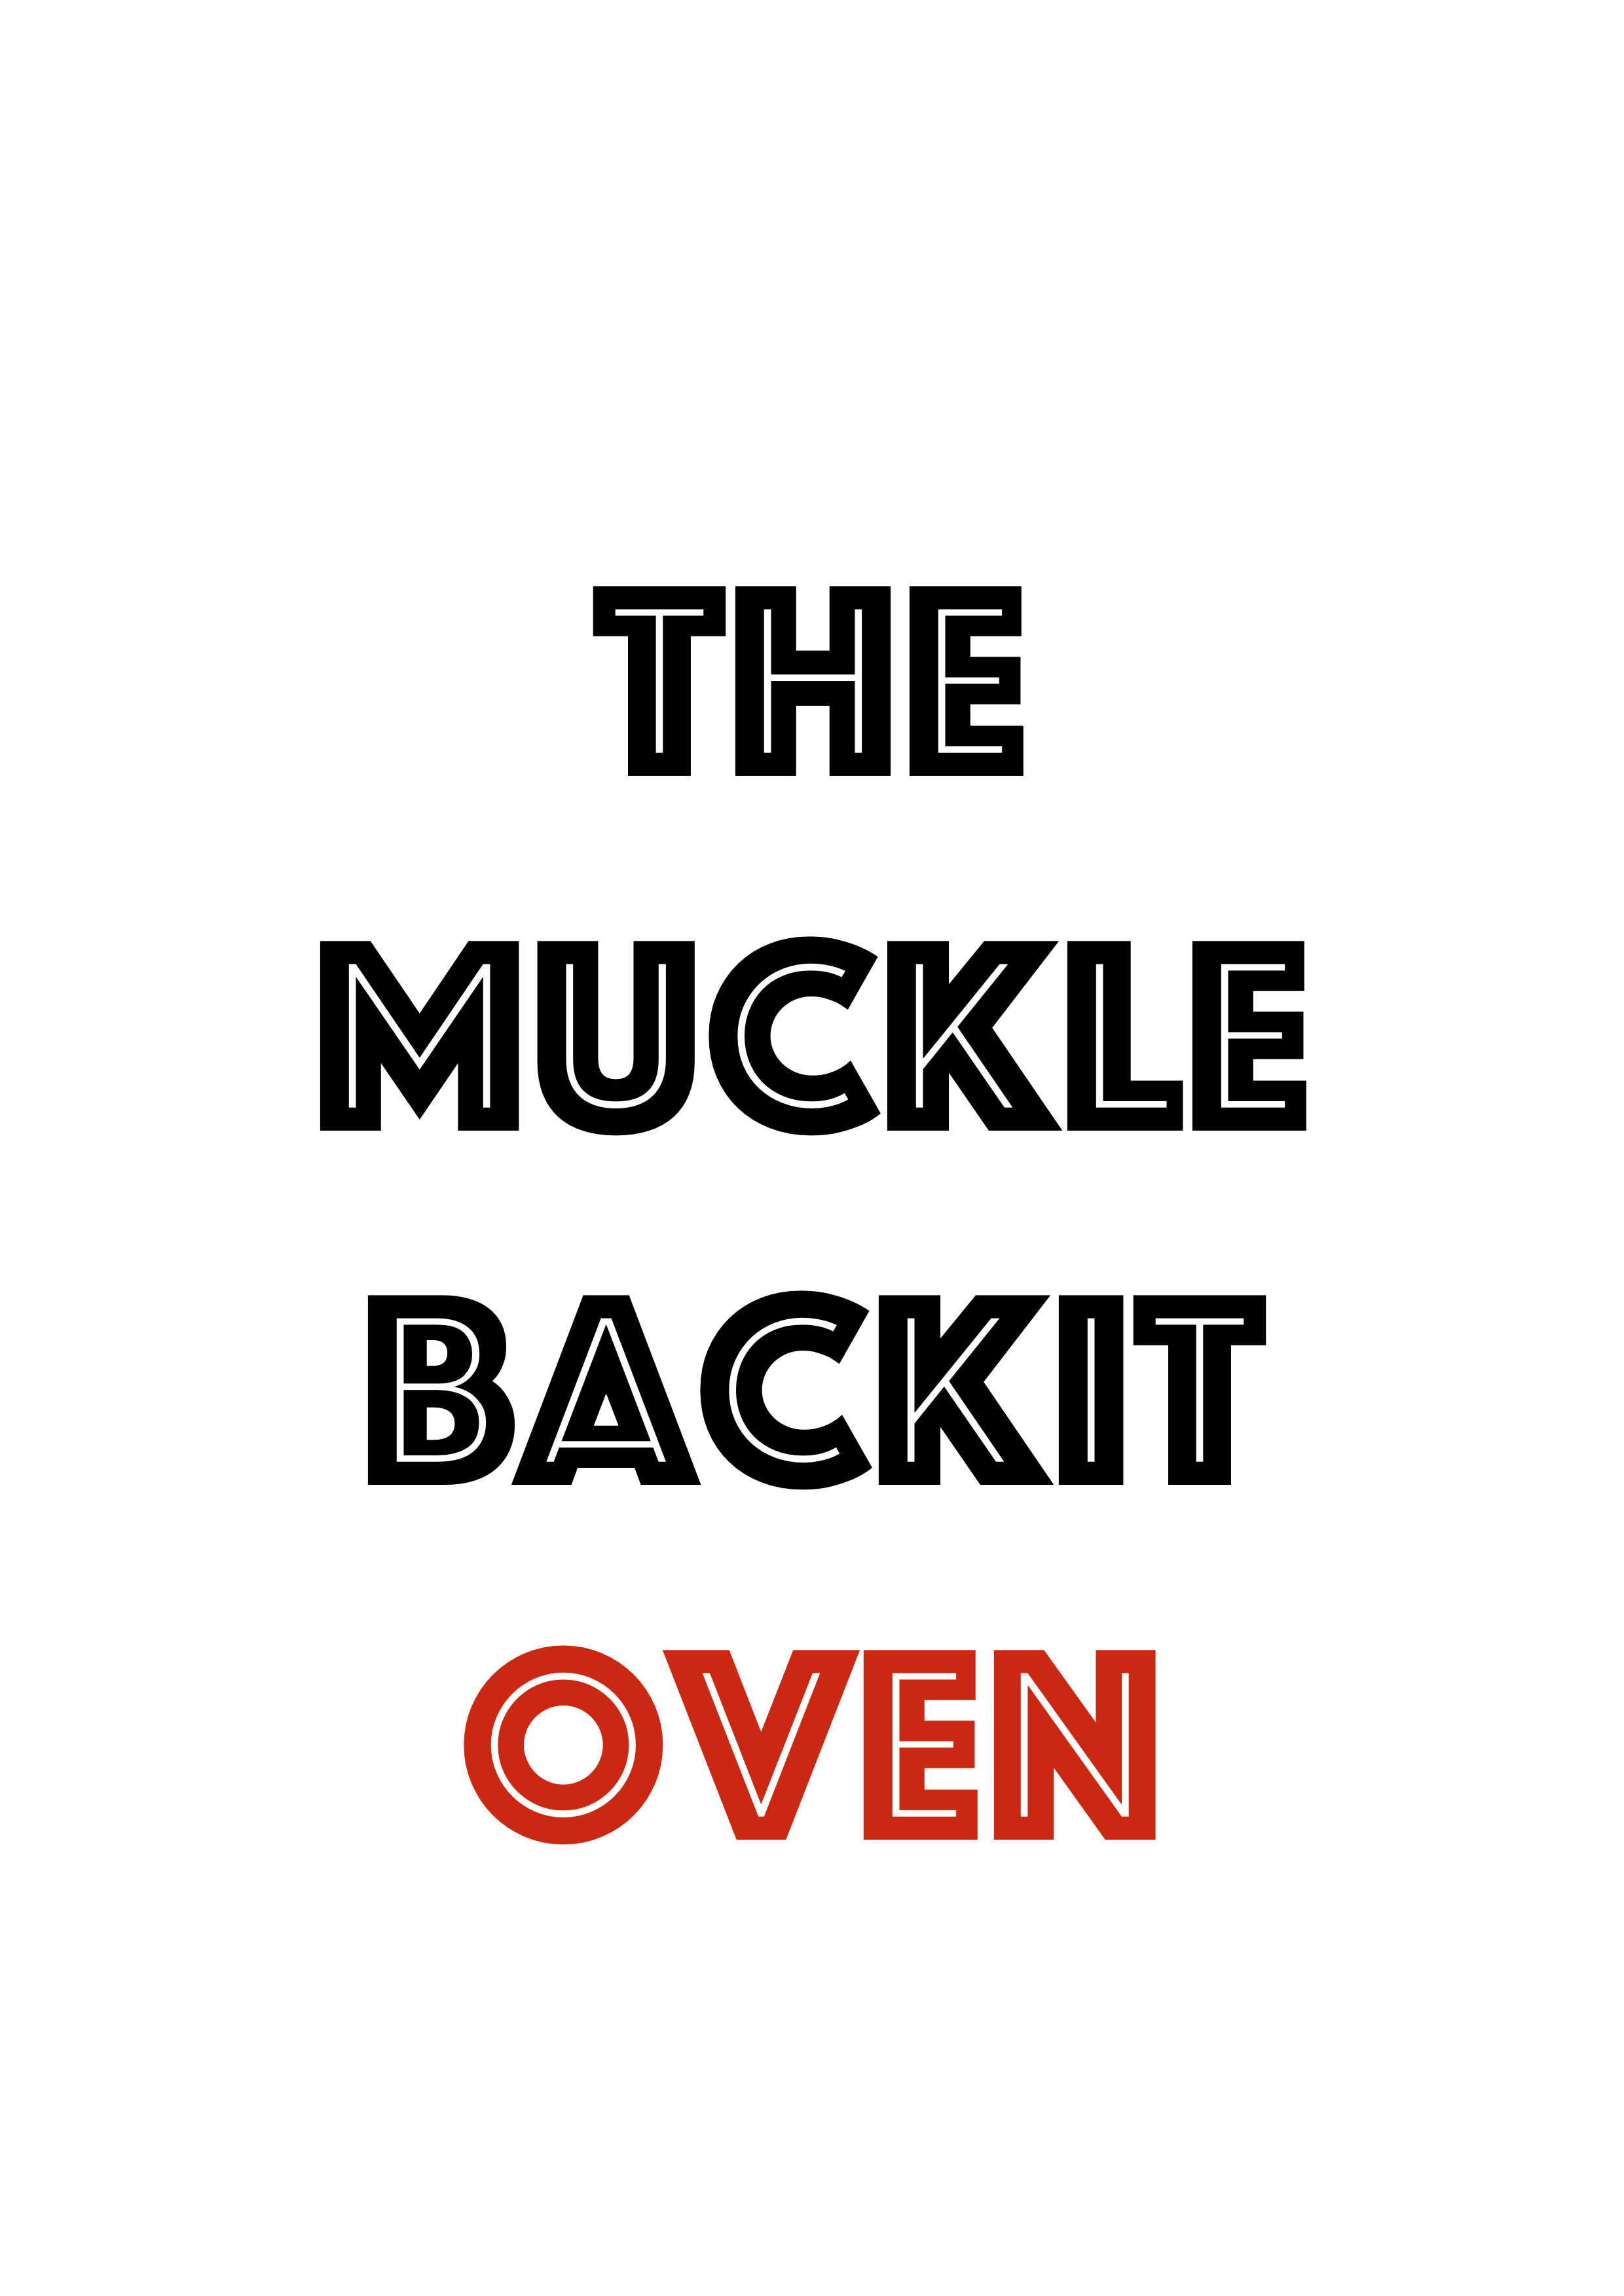 The Muckle Backit Oven